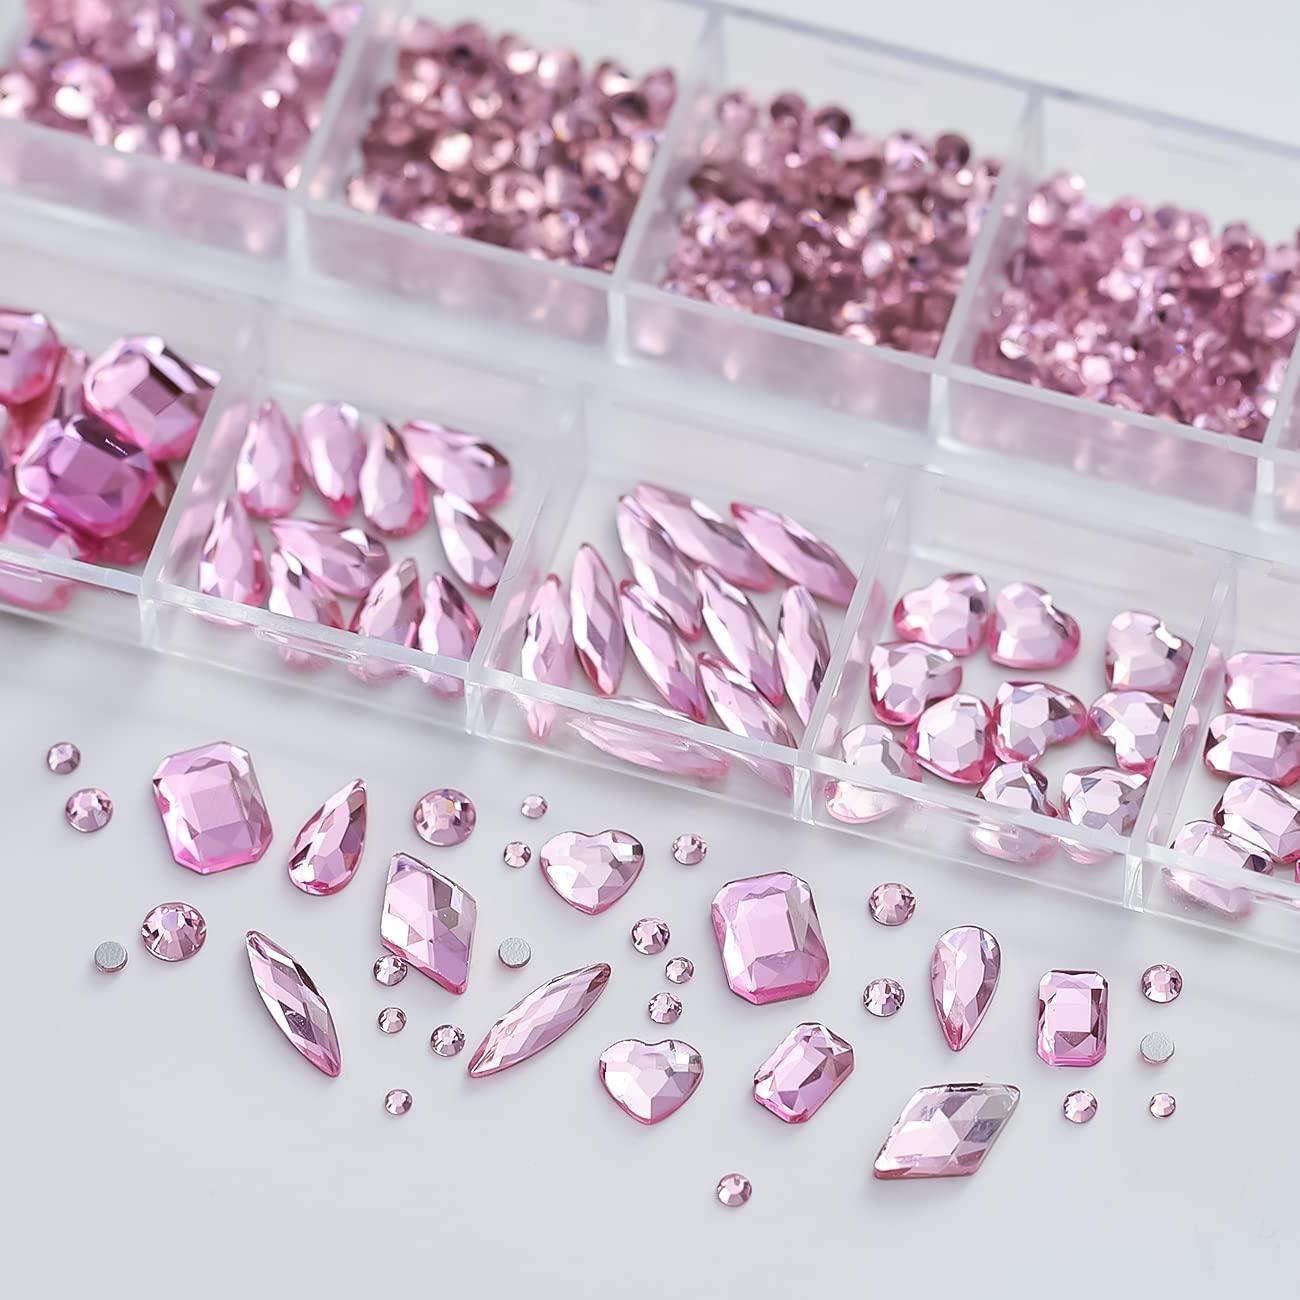  BELICEY Pink AB Crystal Nail Rhinestones Round Beads Flatback  Glass Gems Stones Multi Shapes Sizes Gold Rhinestones Nail Crystals for  Nail DIY Crafts Clothes Shoes Jewelry : Beauty & Personal Care